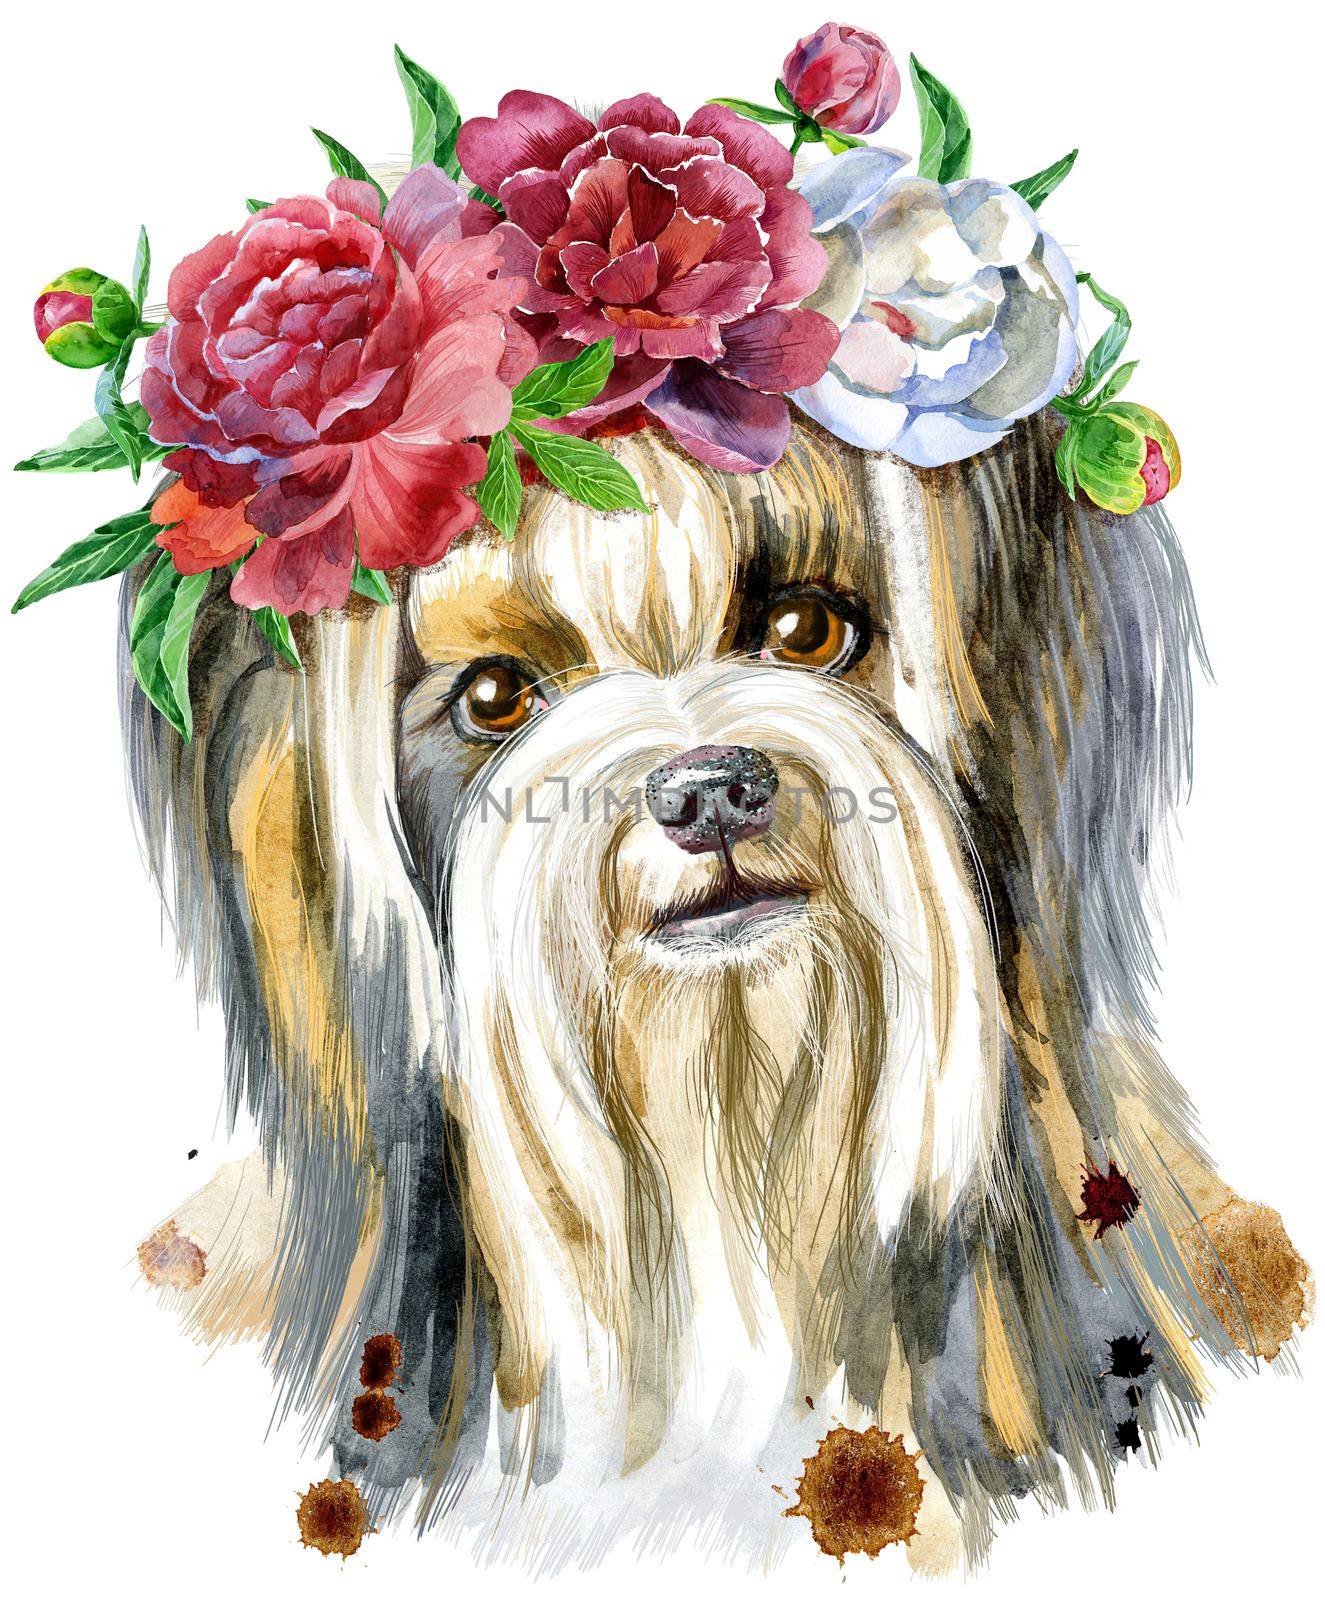 Watercolor portrait of yorkshire terrier breed dog with wreath of peonies. by NataOmsk